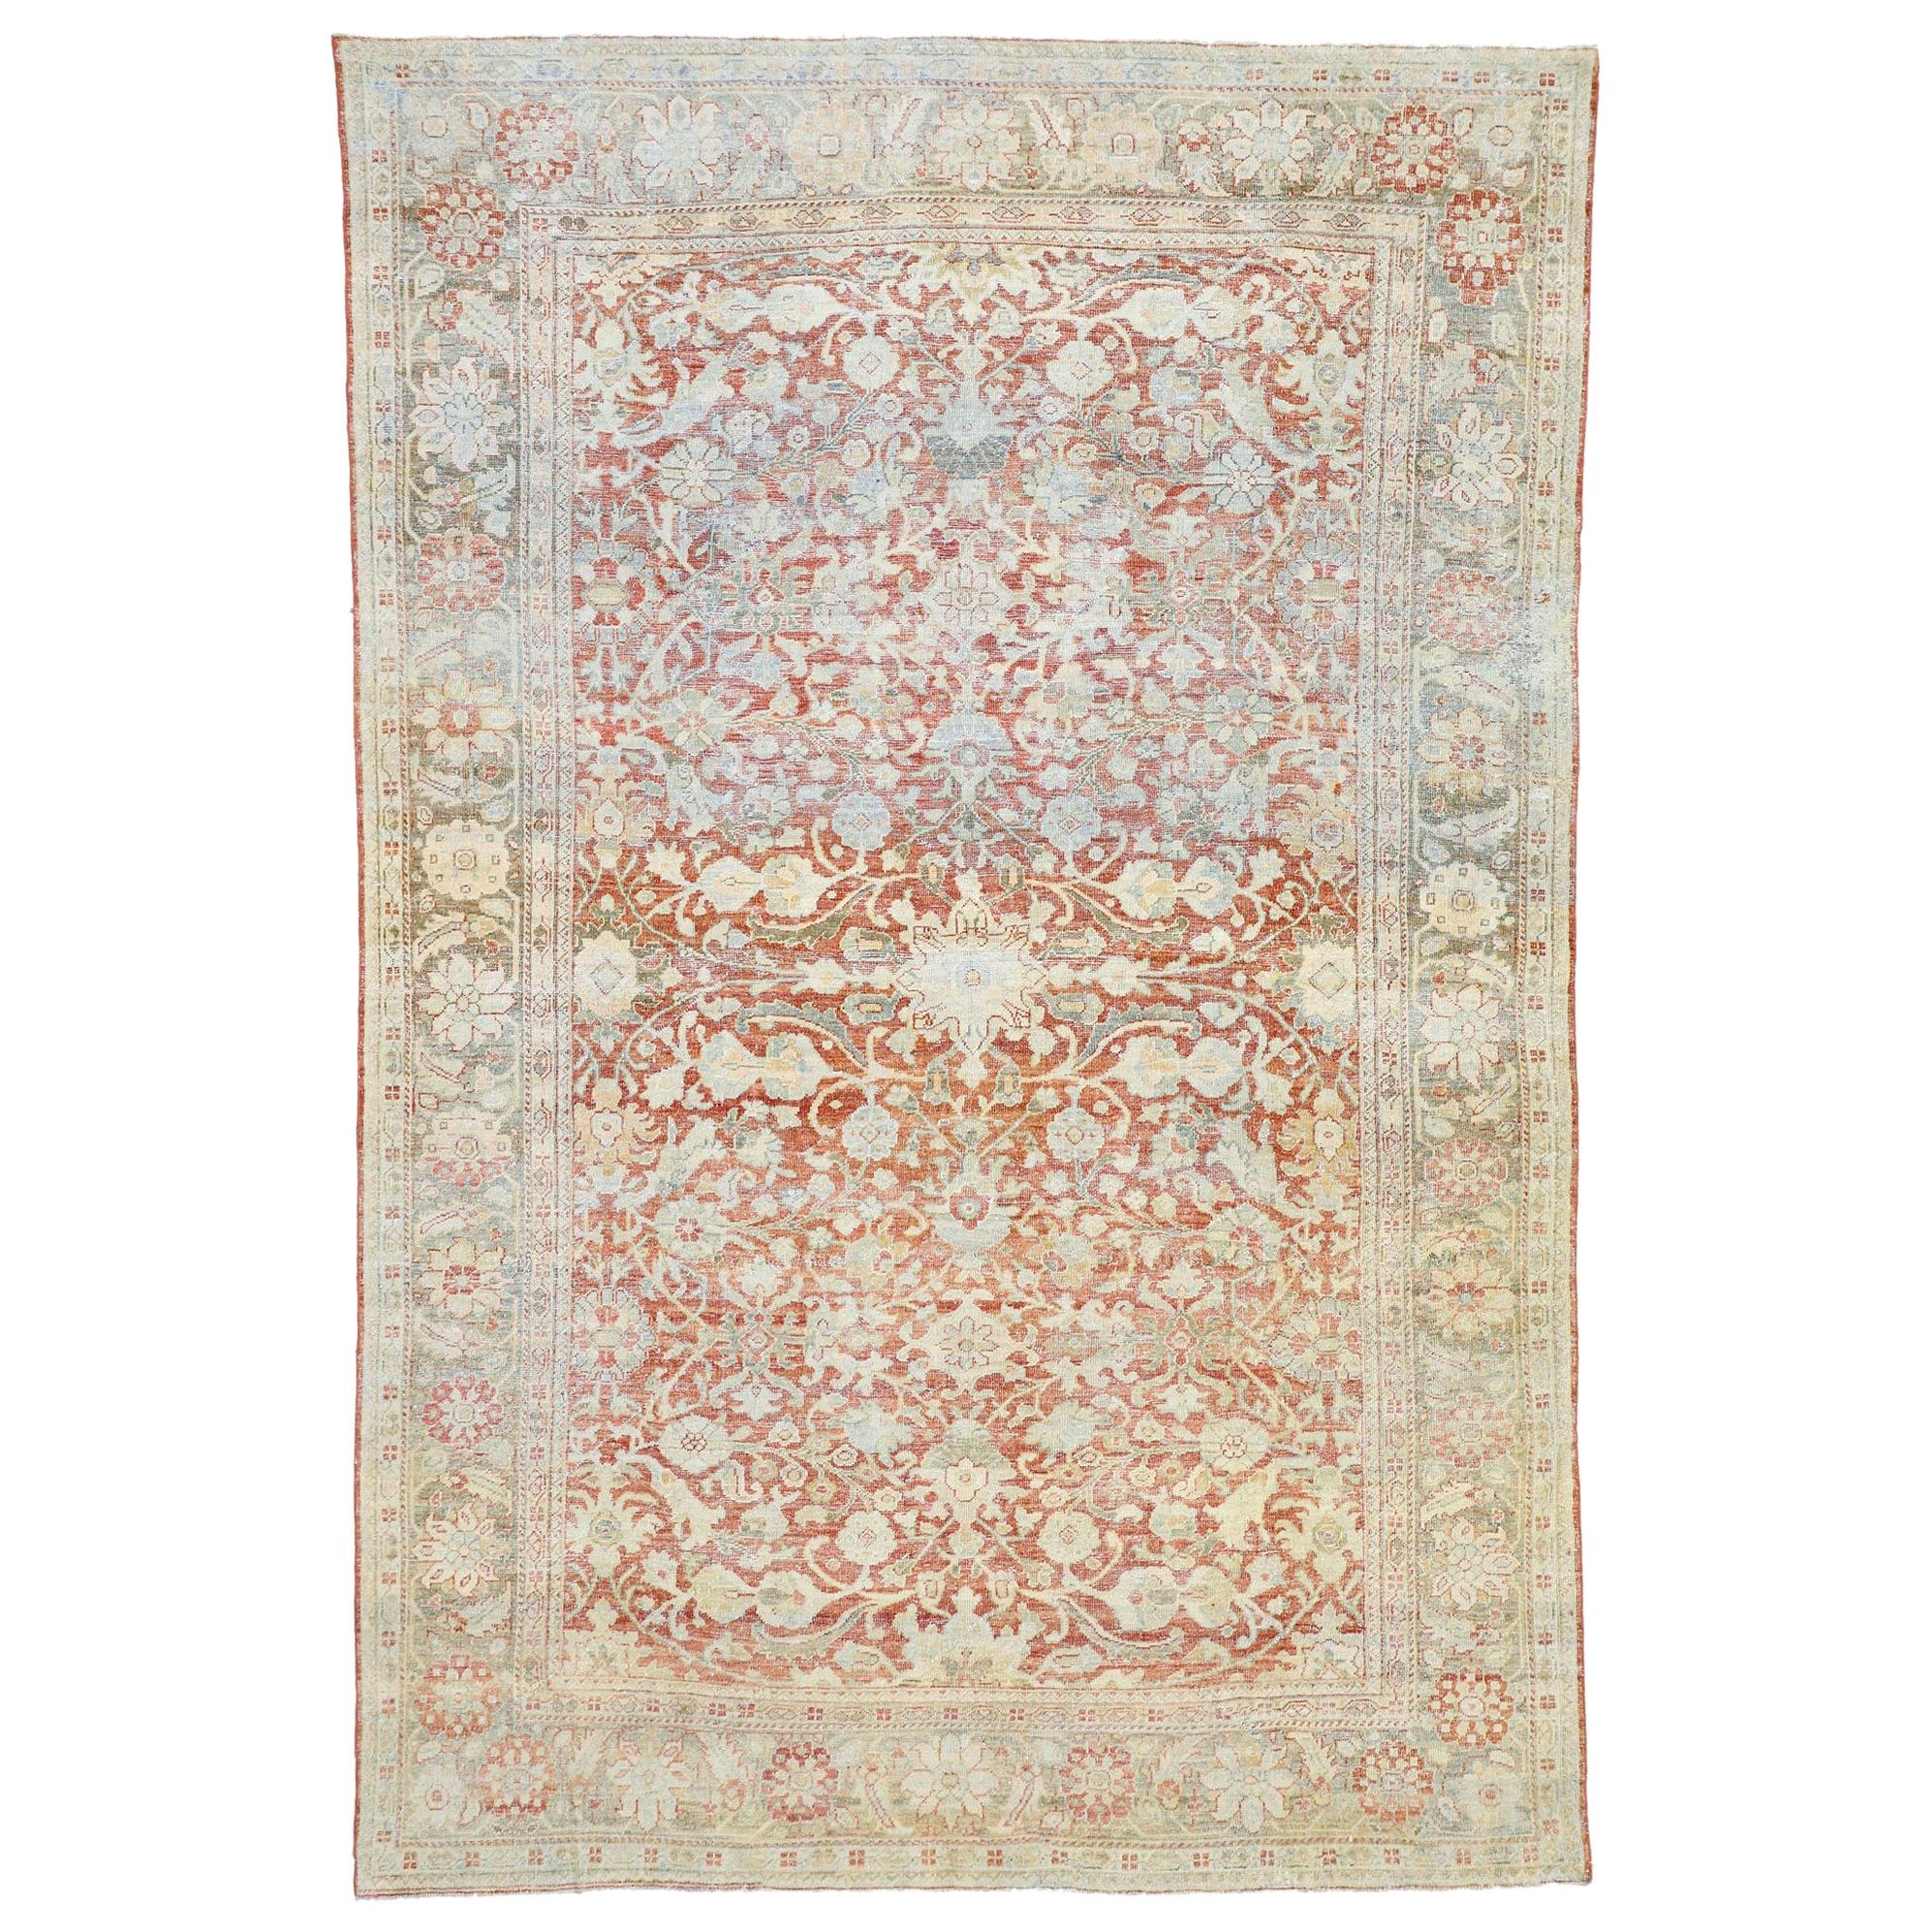 Distressed Antique Persian Mahal Design Rug with Relaxed Federal Style For Sale